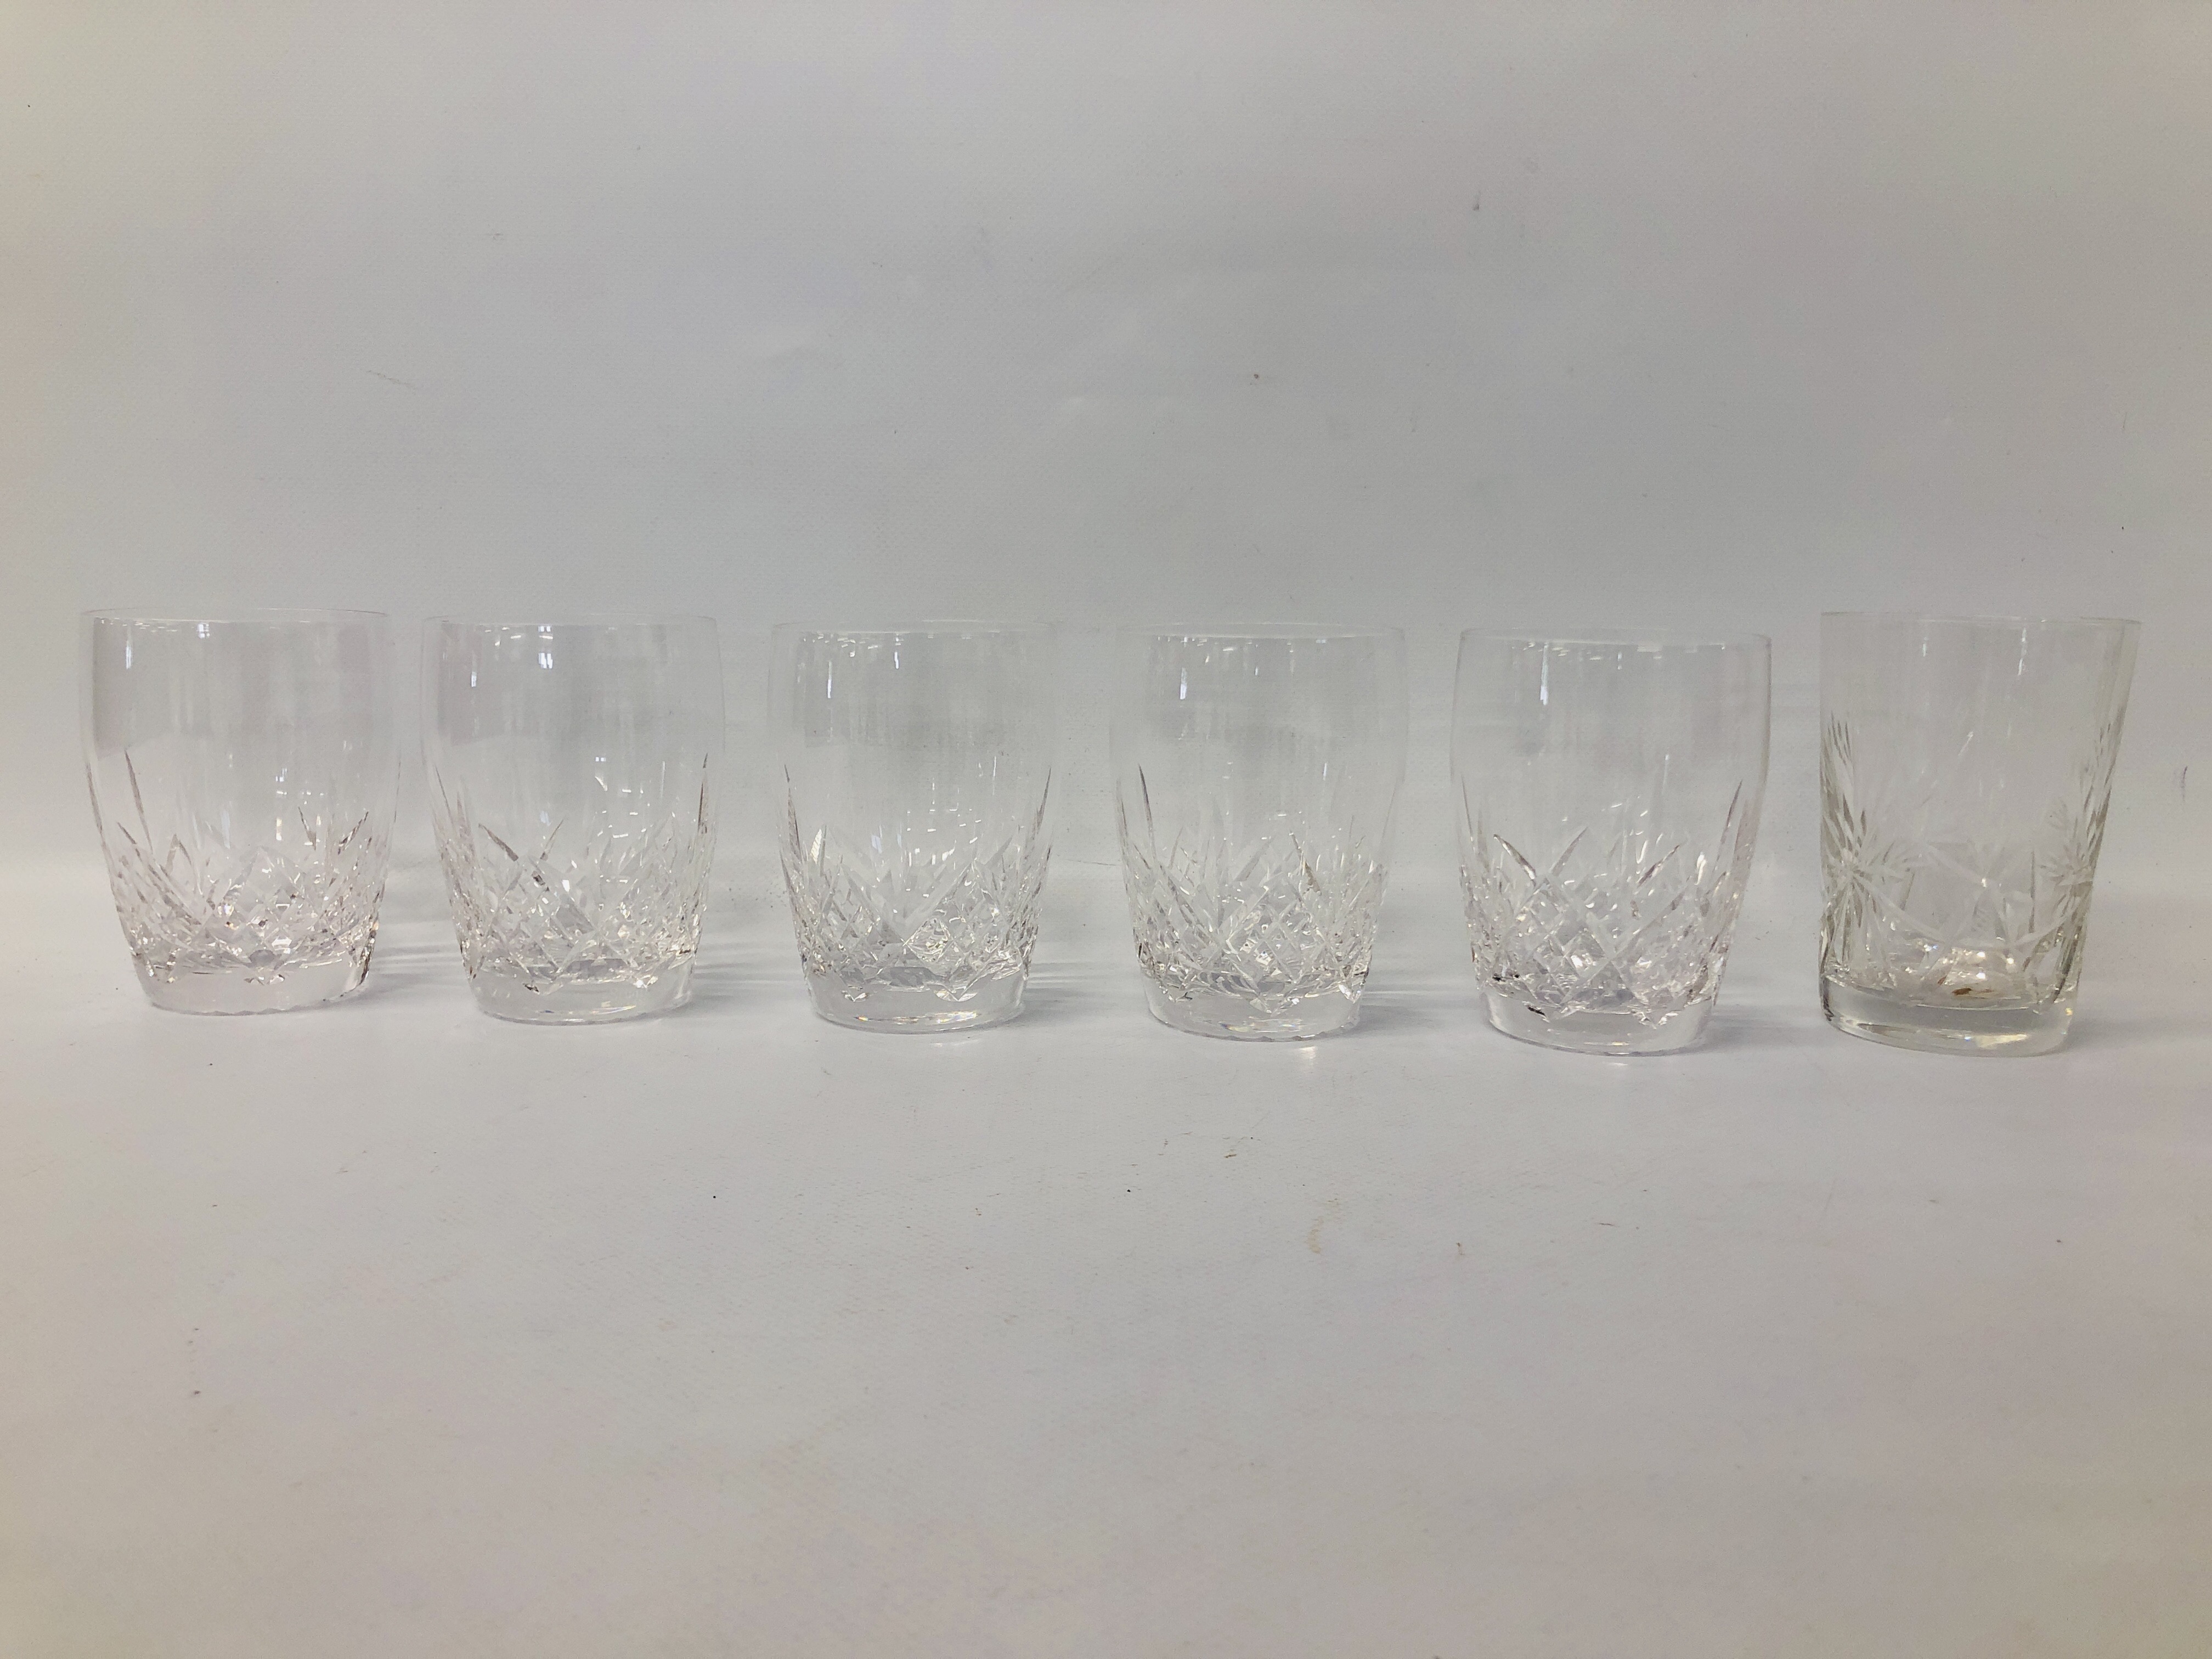 COLLECTION OF GOOD QUALITY CUT GLASS CRYSTAL DRINKING VESSELS ALONG WITH A SET OF 4 HAND PAINTED - Image 6 of 11